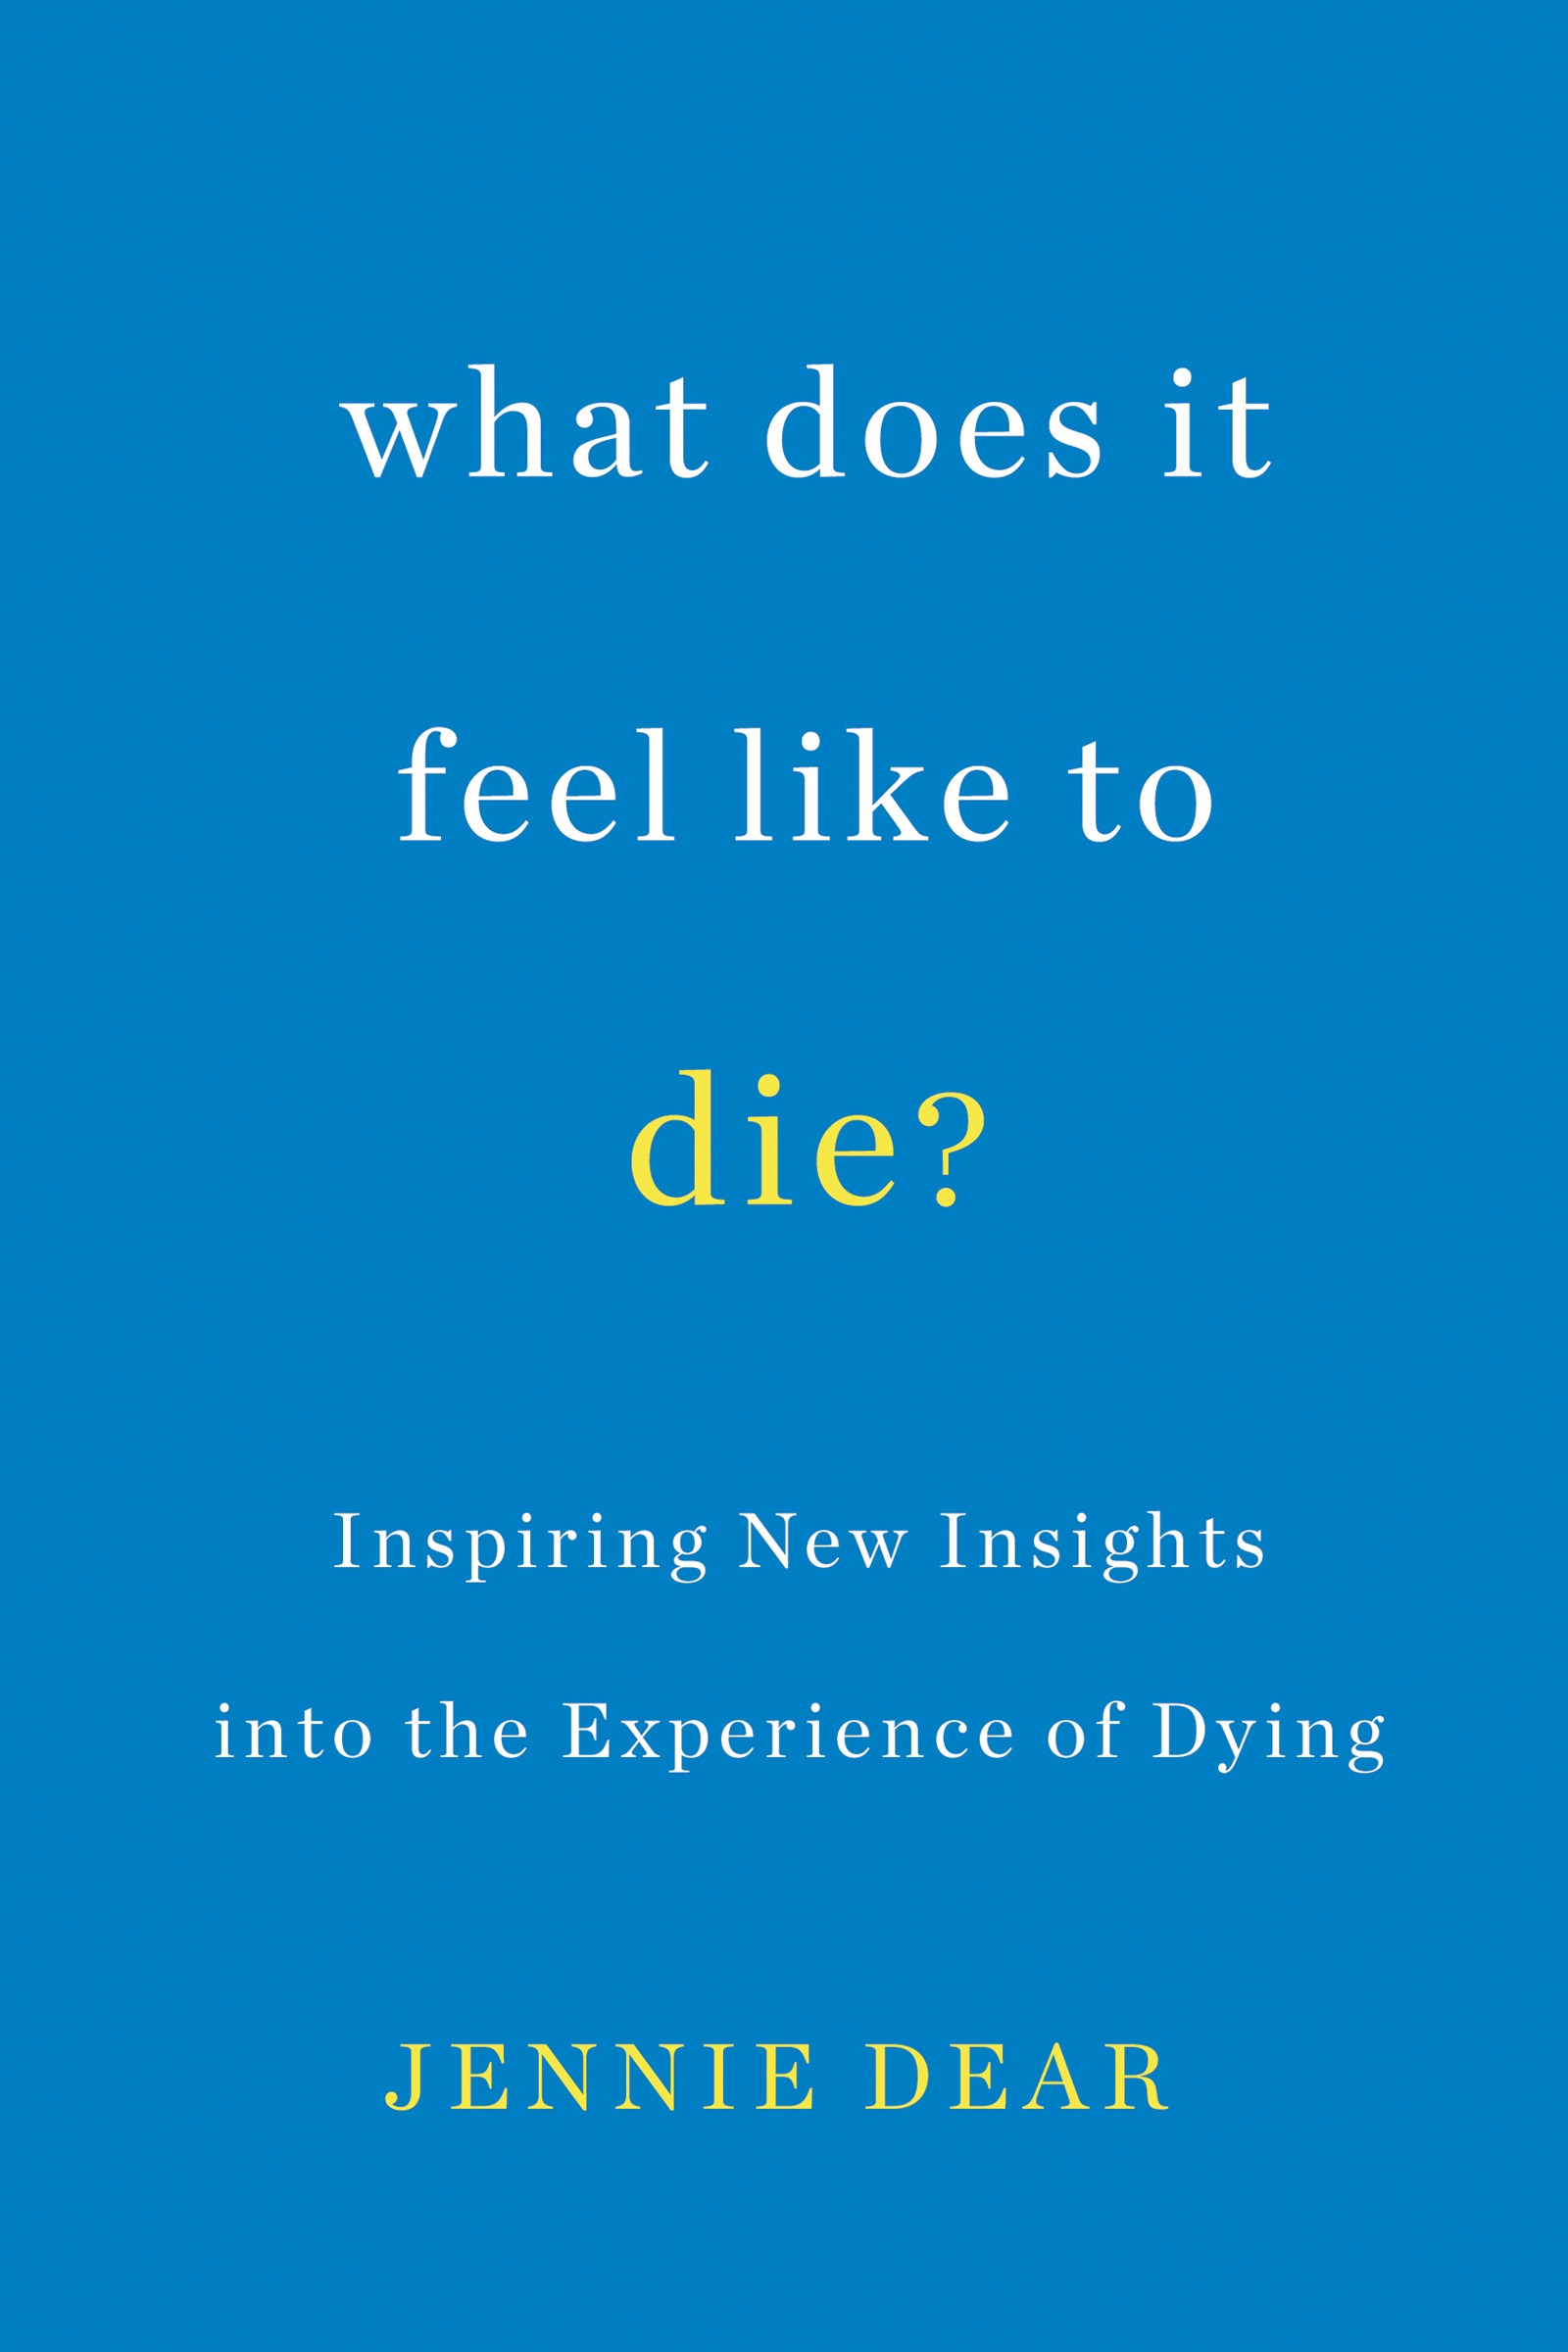 What Does It Feel Like to Die?: Inspiring New Insights into the Experience of Dying